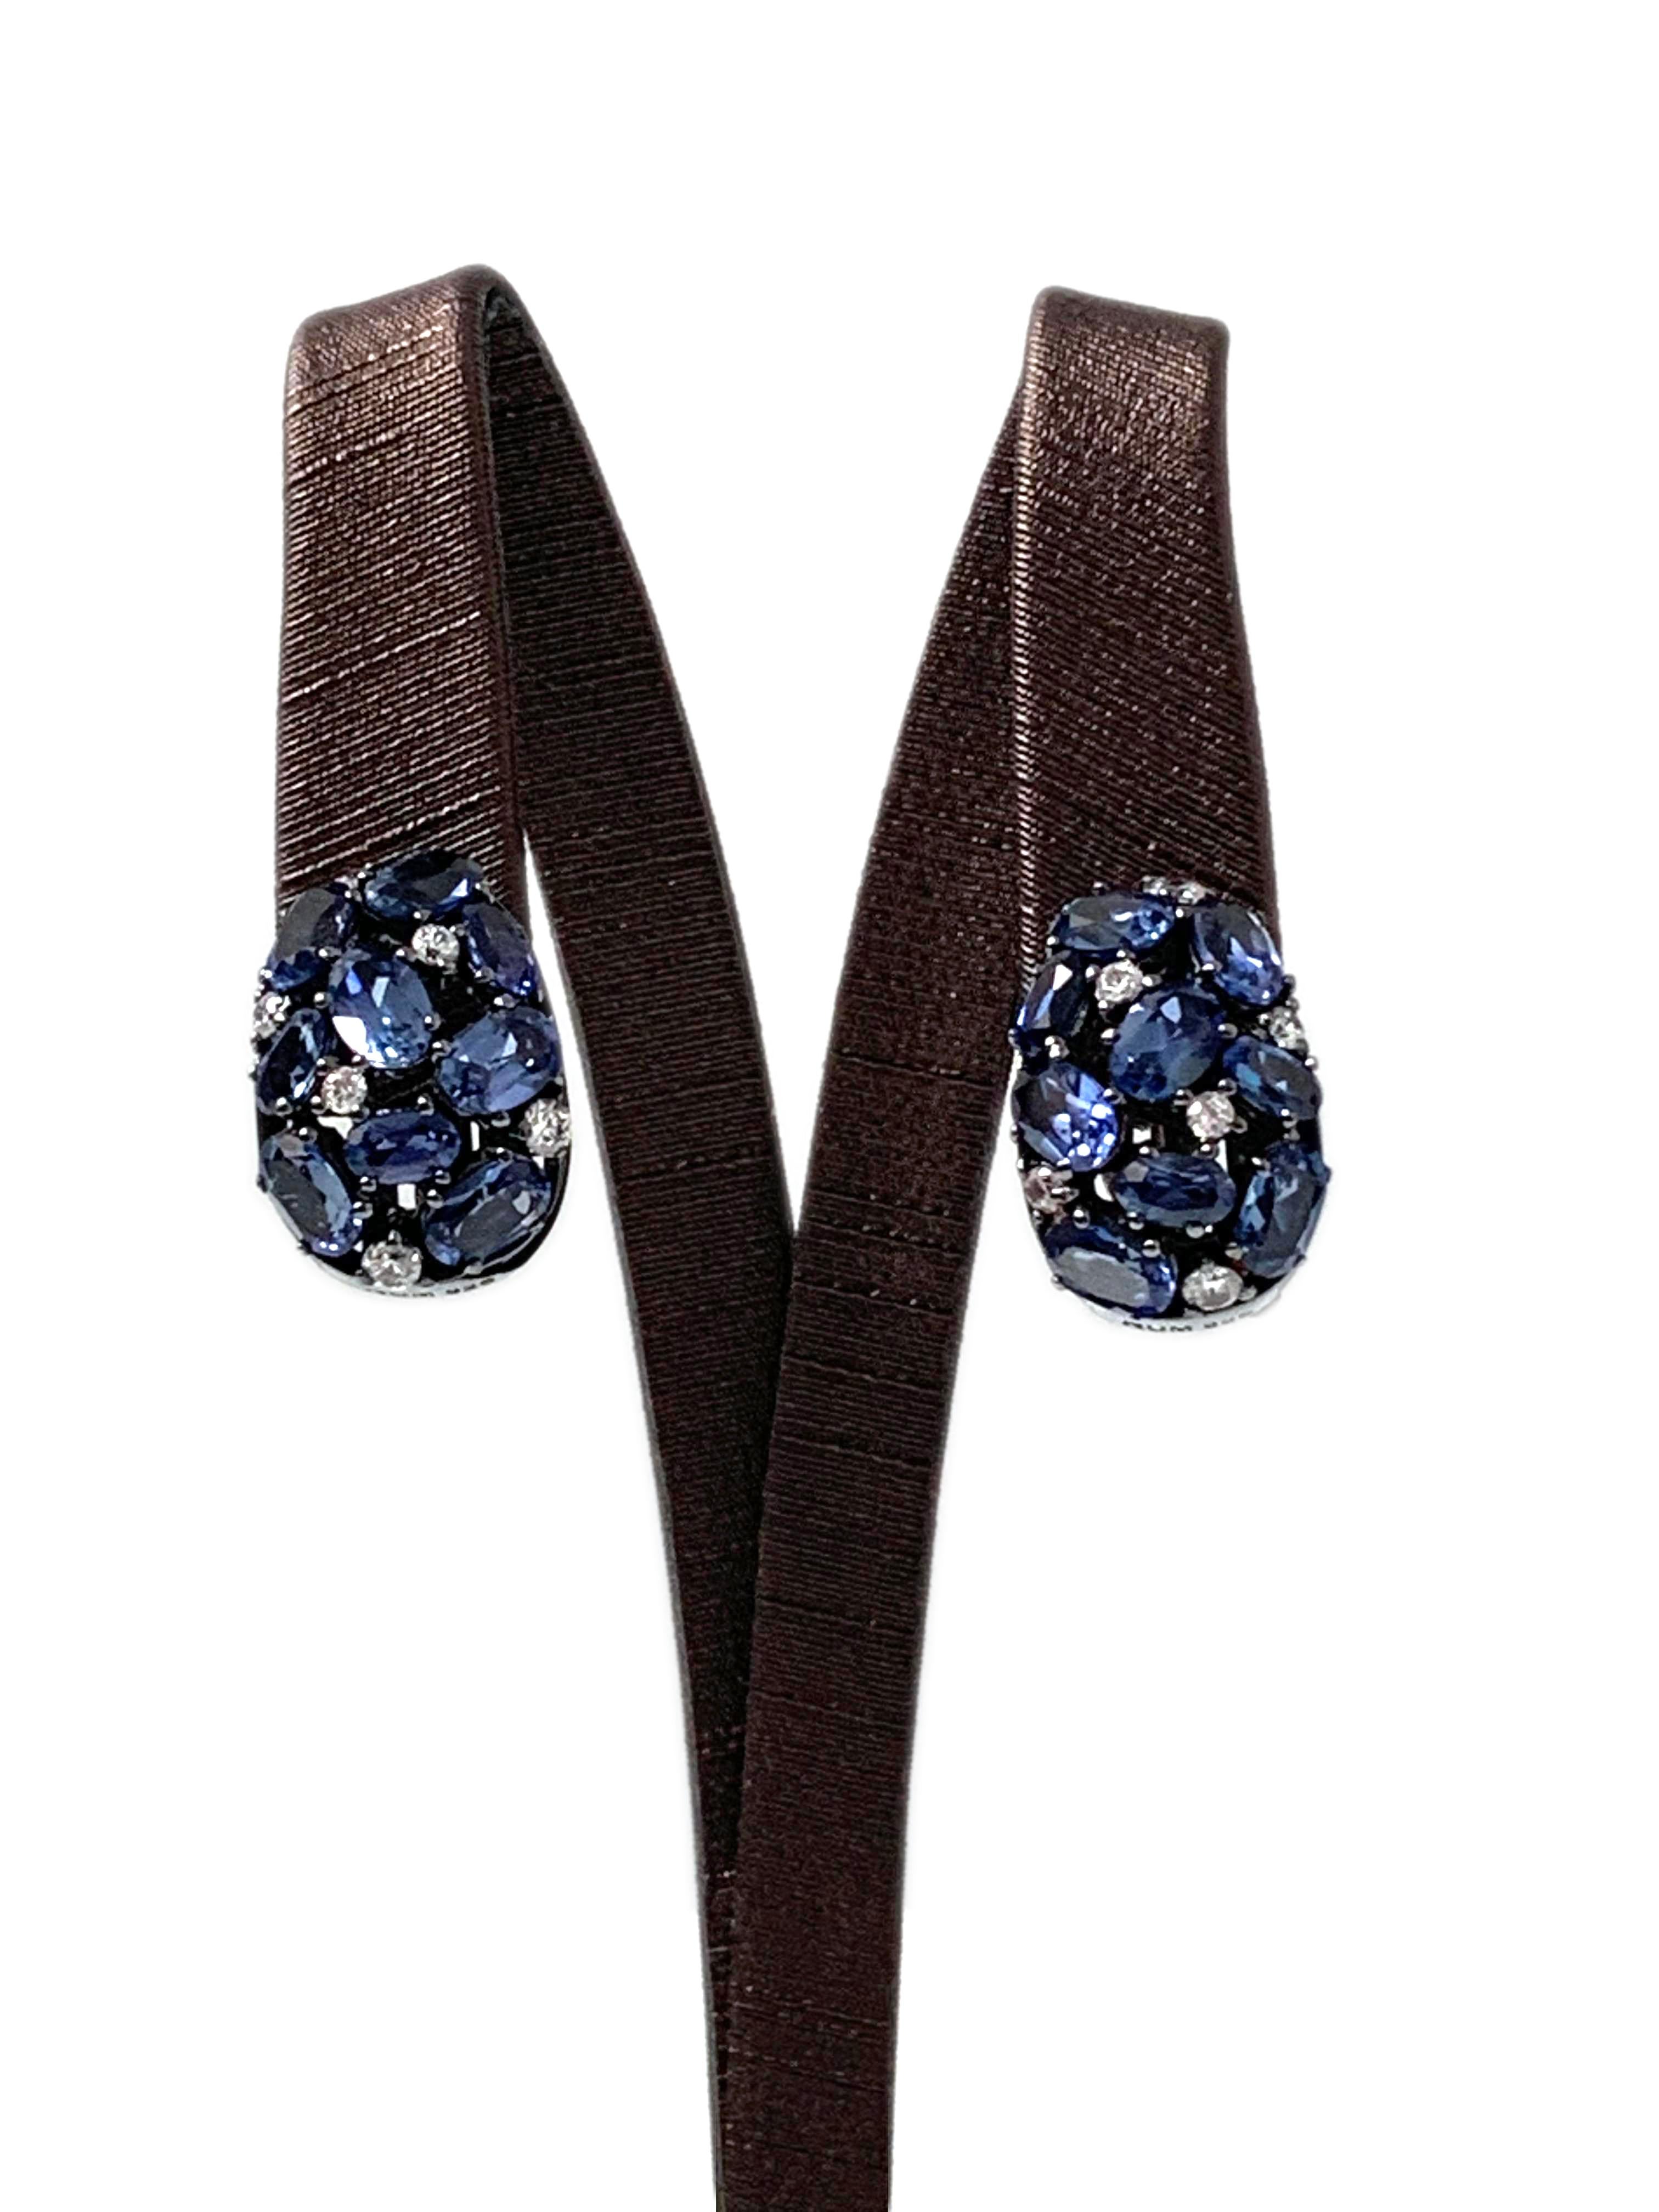 Fabulous egg-shape encrusted Lab-created Sapphire and Simulated Diamond Clip-on Earrings

These earrings feature 30 pcs of oval lab-created sapphire and round simulated diamond cz, handset in black rhodium plated sterling silver. The earrings